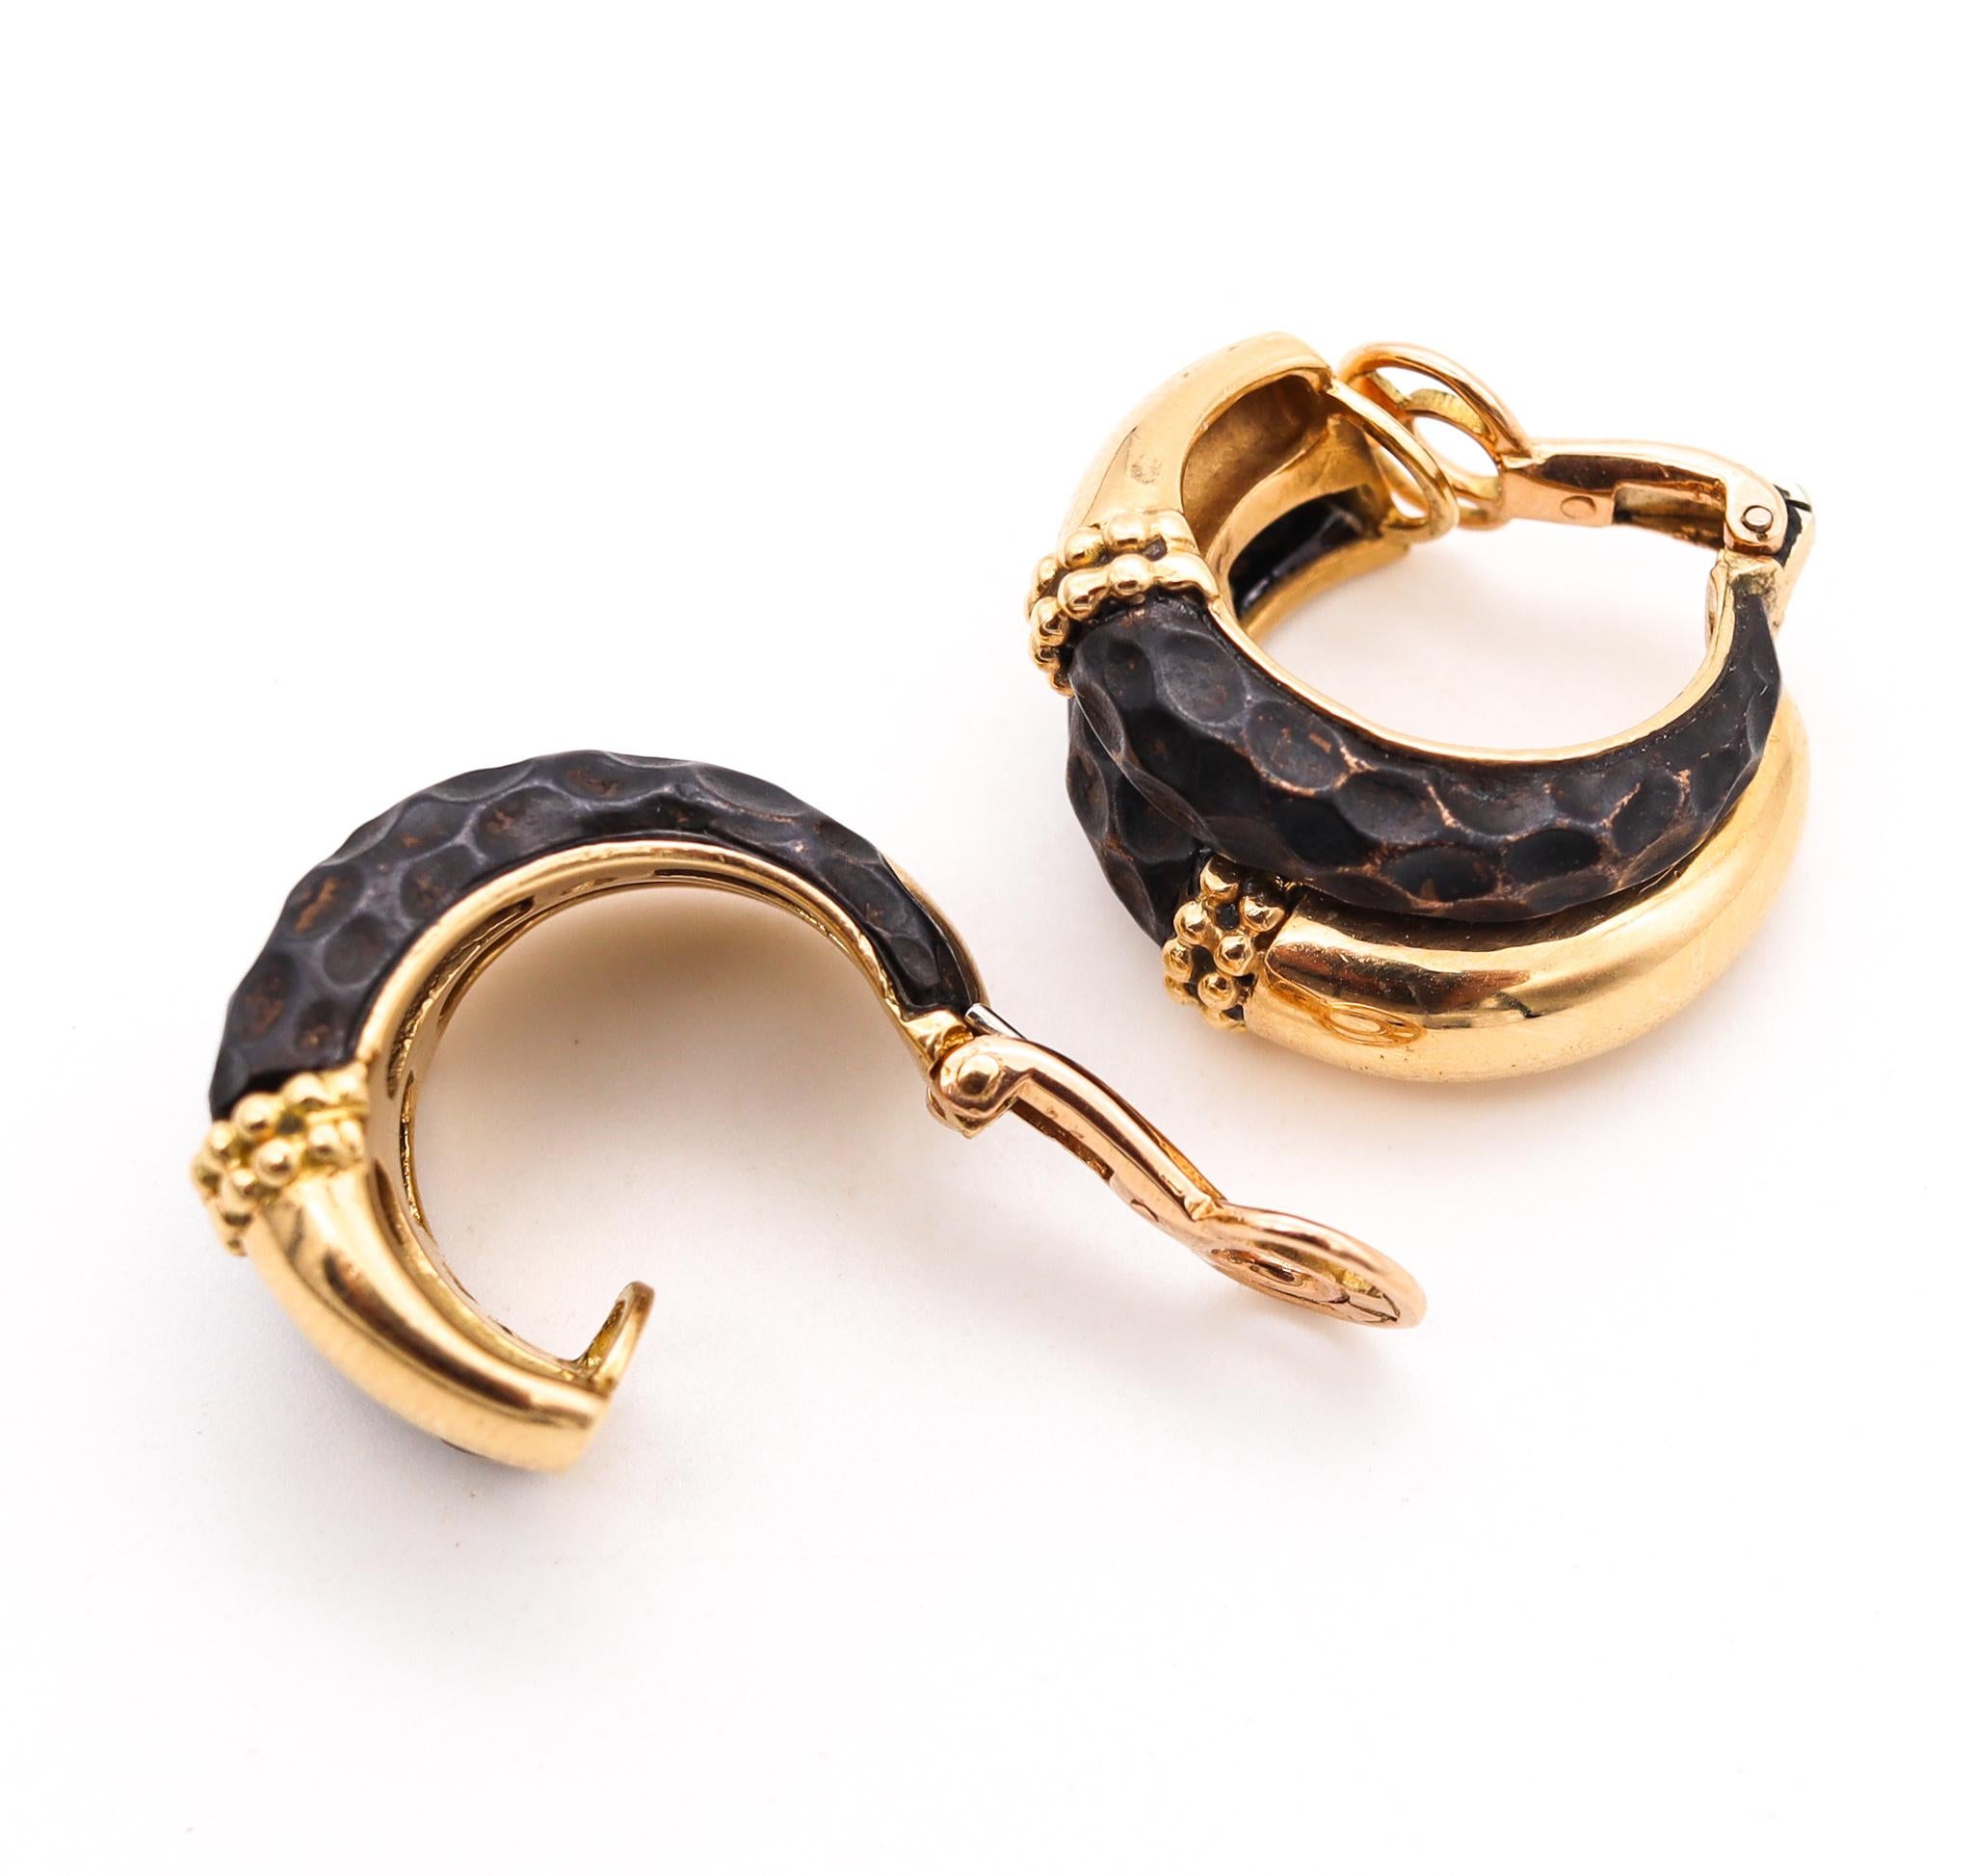 Boucheron 1970 Paris Modernism Clip Earrings In 18Kt Gold with Patinated Airain 2